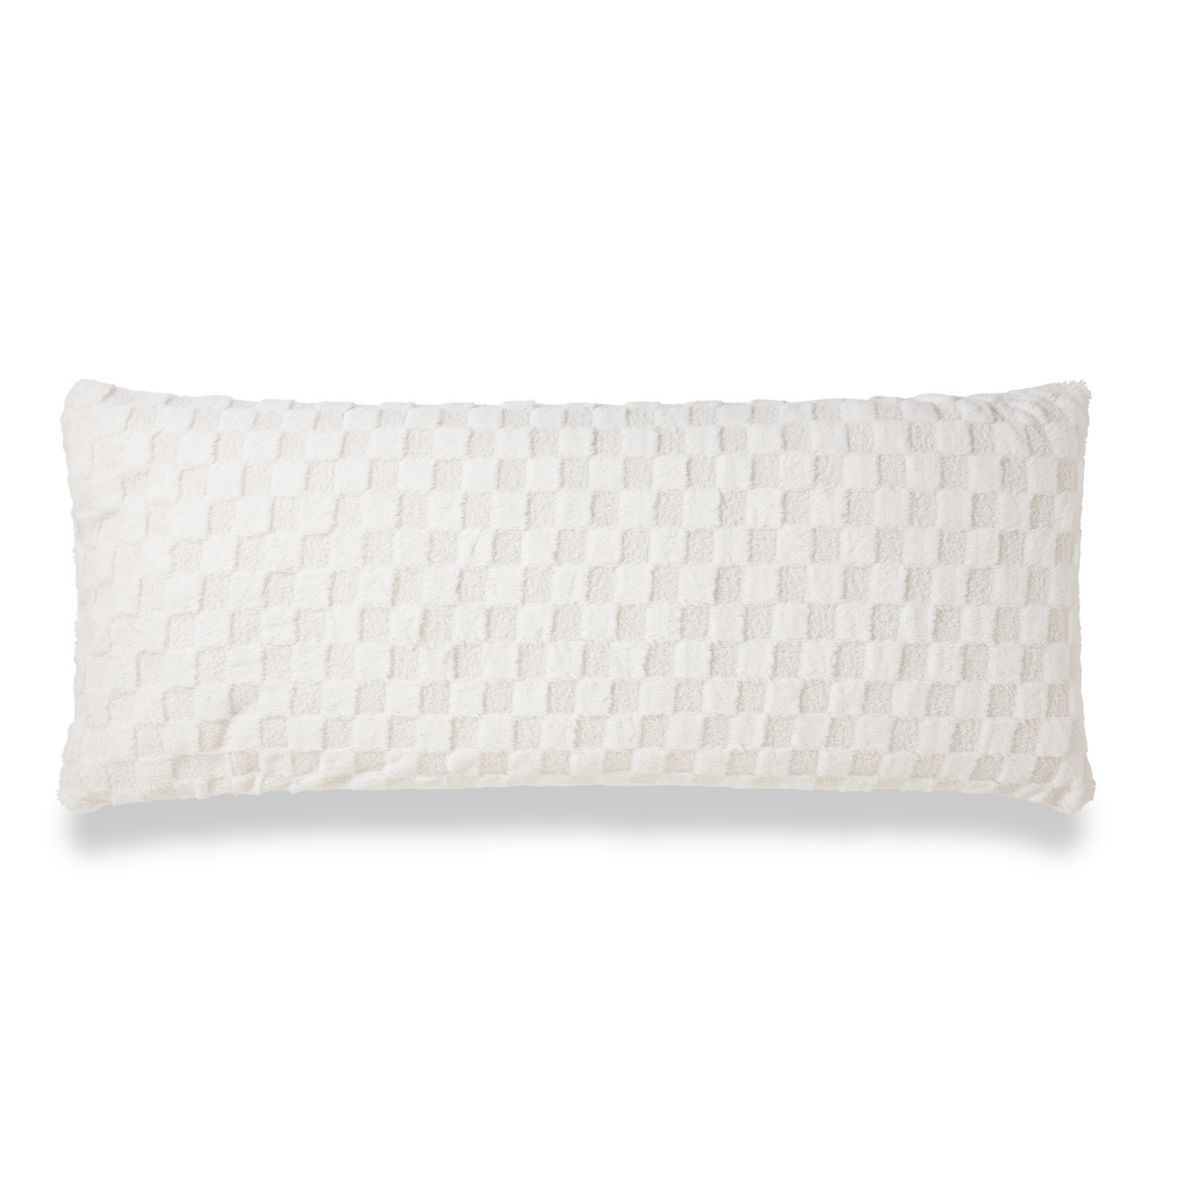 The Big One® Faux Fur Checkered Body Pillow The Big One